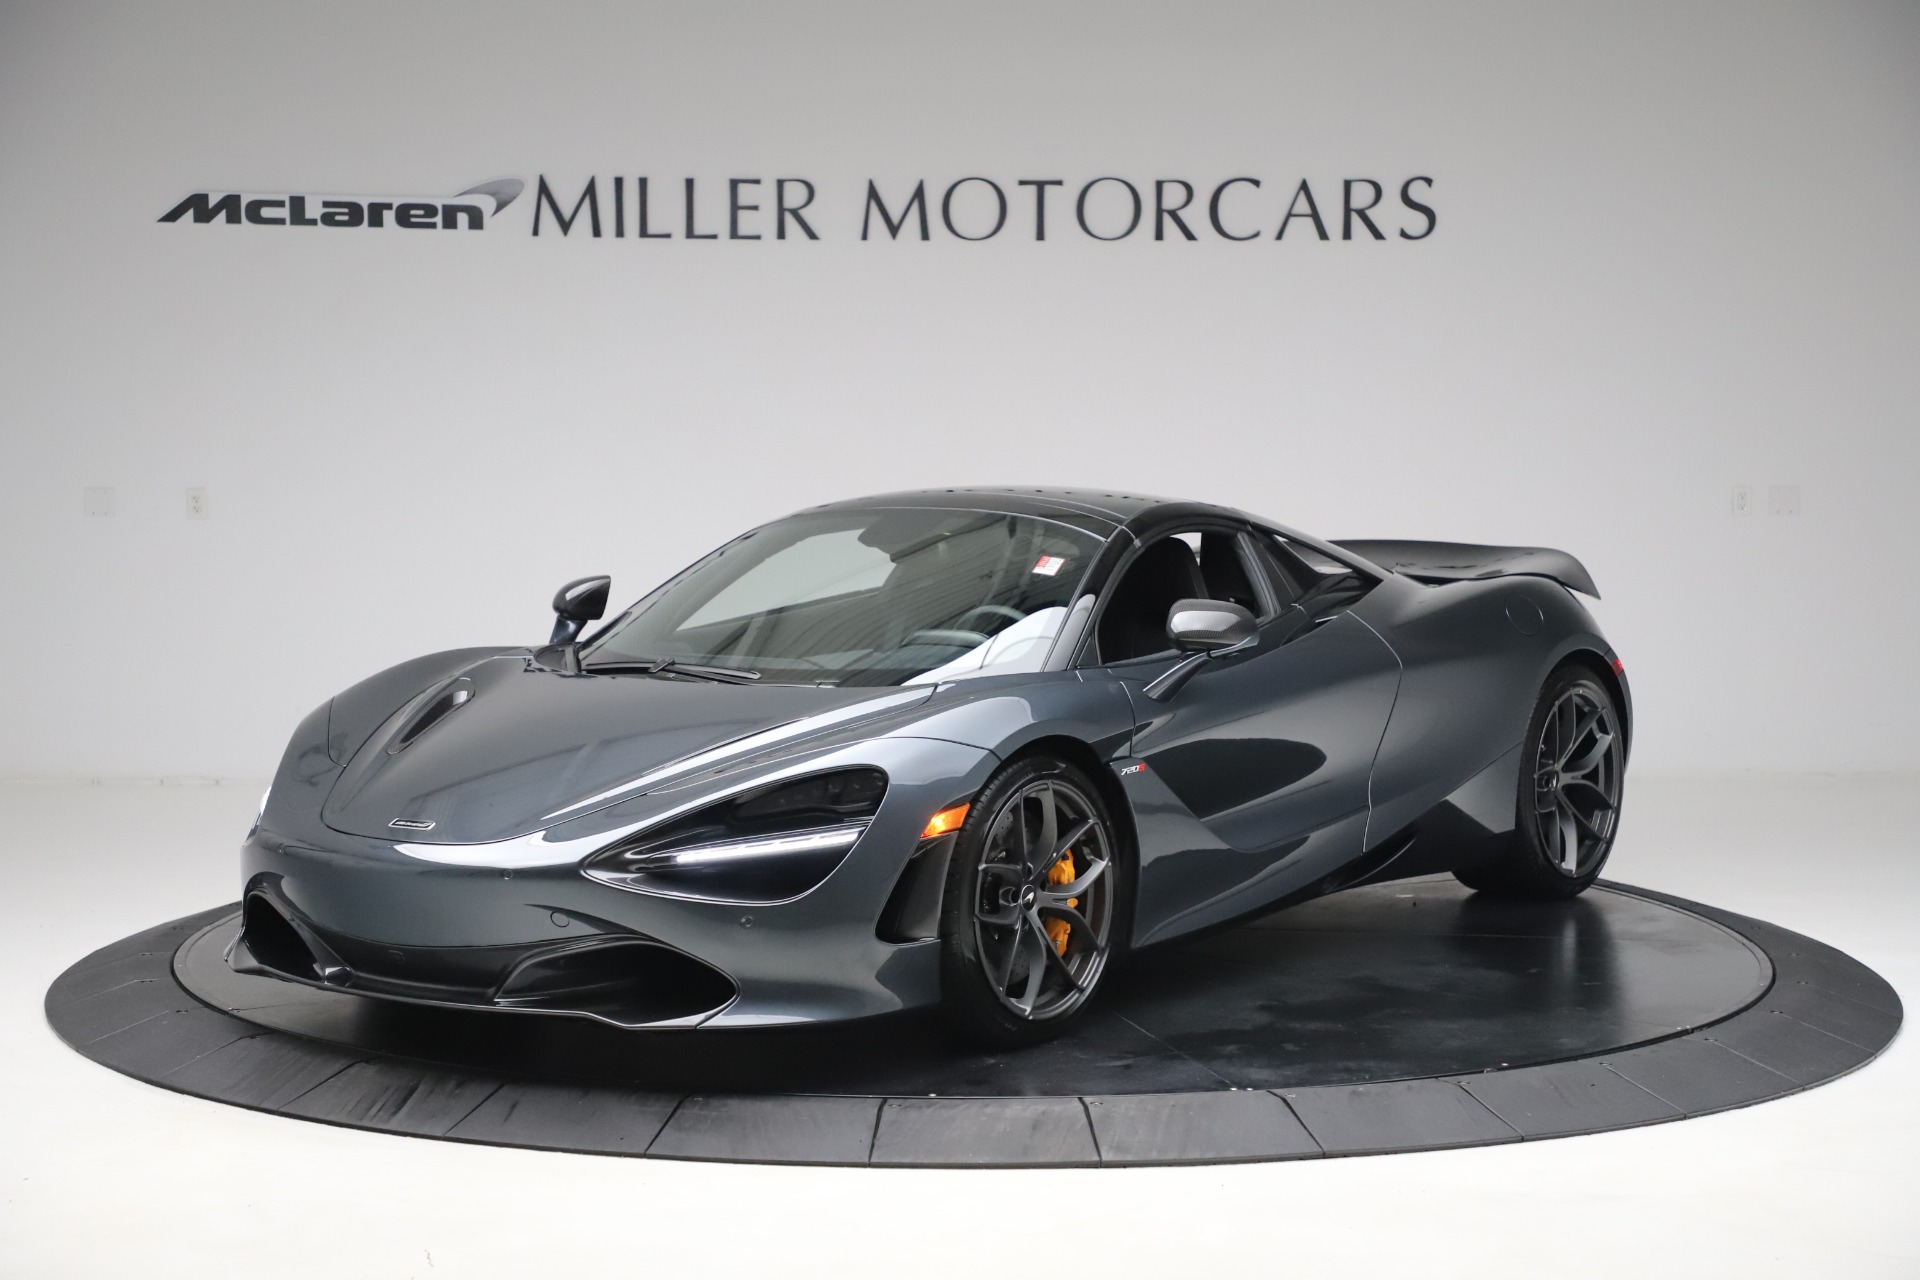 720s grey and black